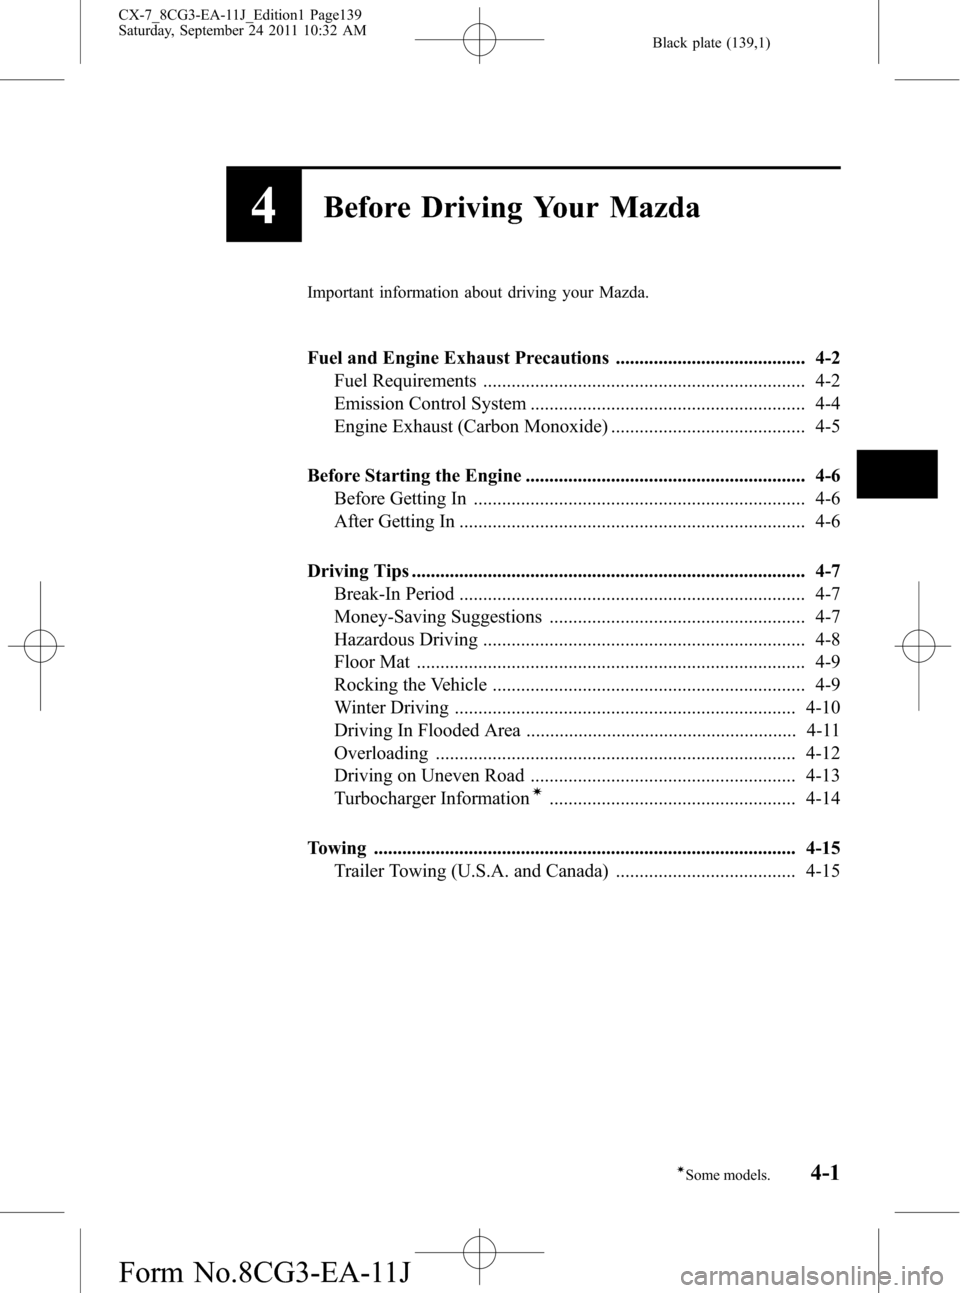 MAZDA MODEL CX-7 2012  Owners Manual (in English) Black plate (139,1)
4Before Driving Your Mazda
Important information about driving your Mazda.
Fuel and Engine Exhaust Precautions ........................................ 4-2
Fuel Requirements ......